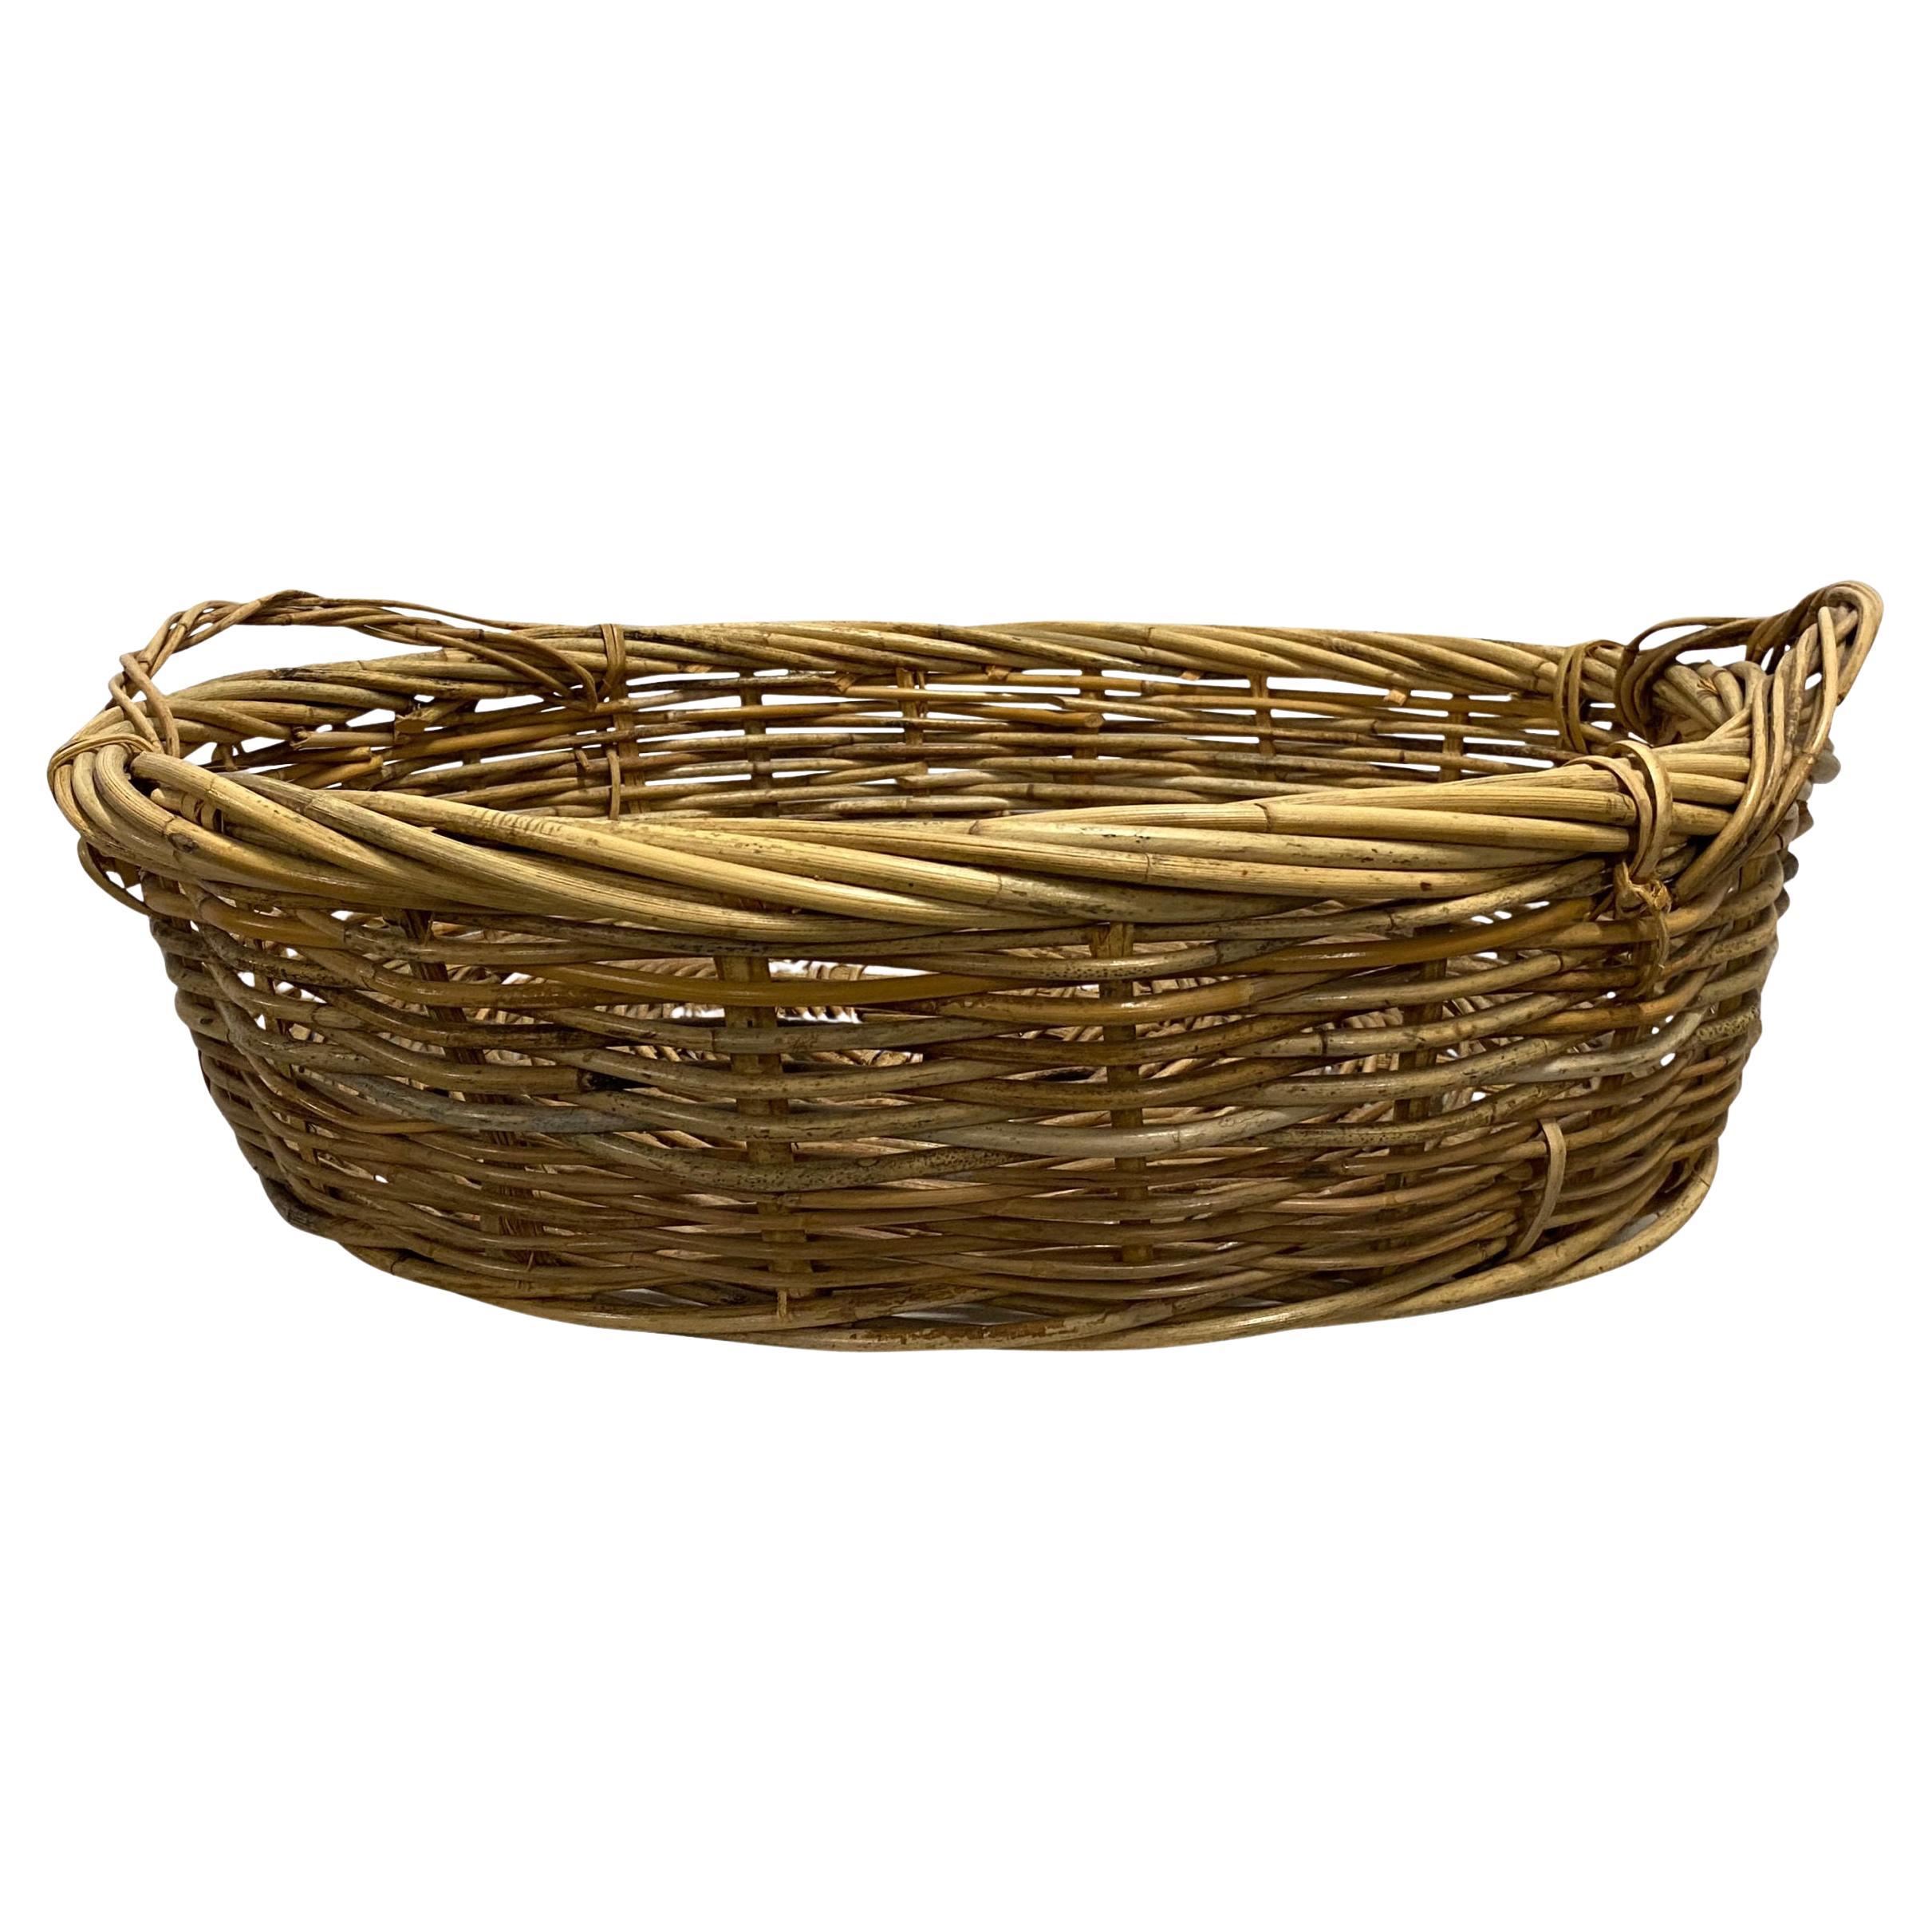 Antique Wicker Wash Basket with Handles For Sale